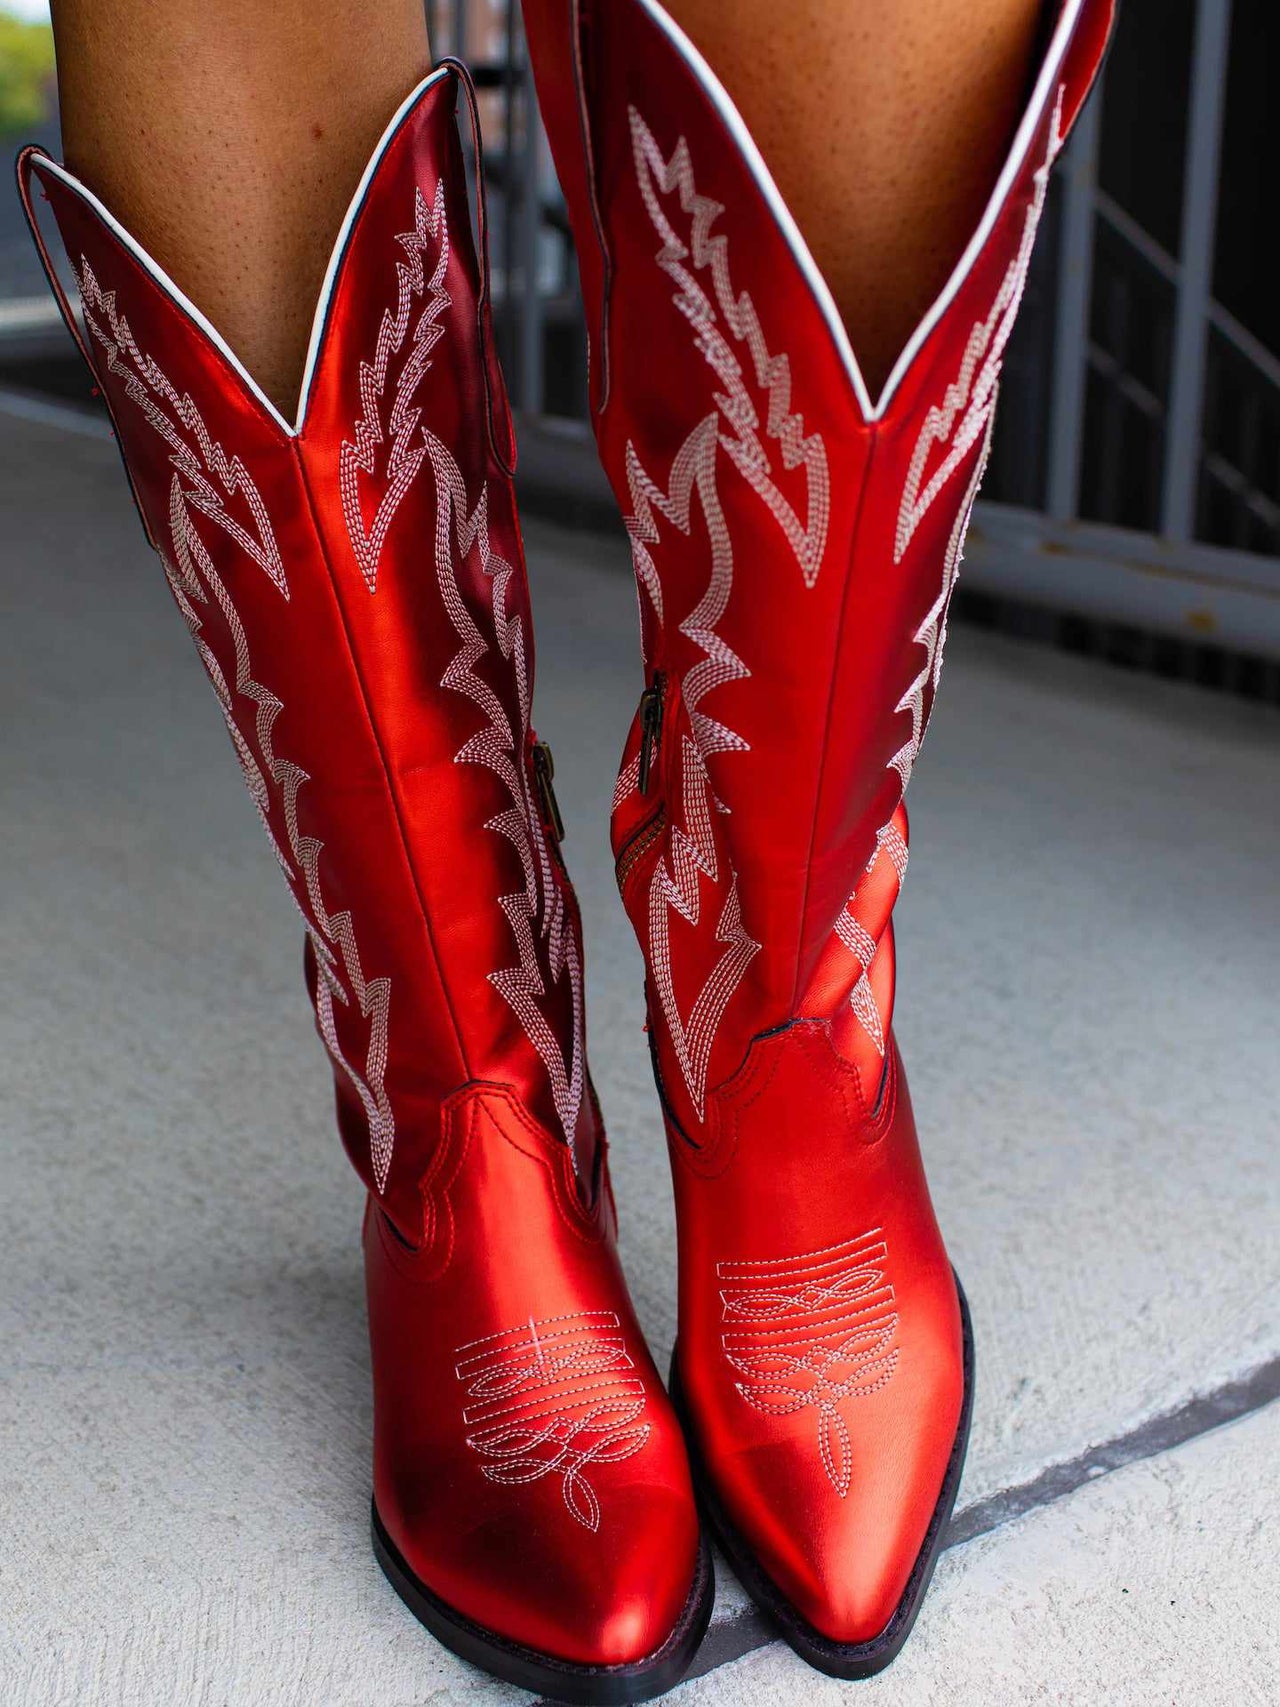 Red cowgirl boots.